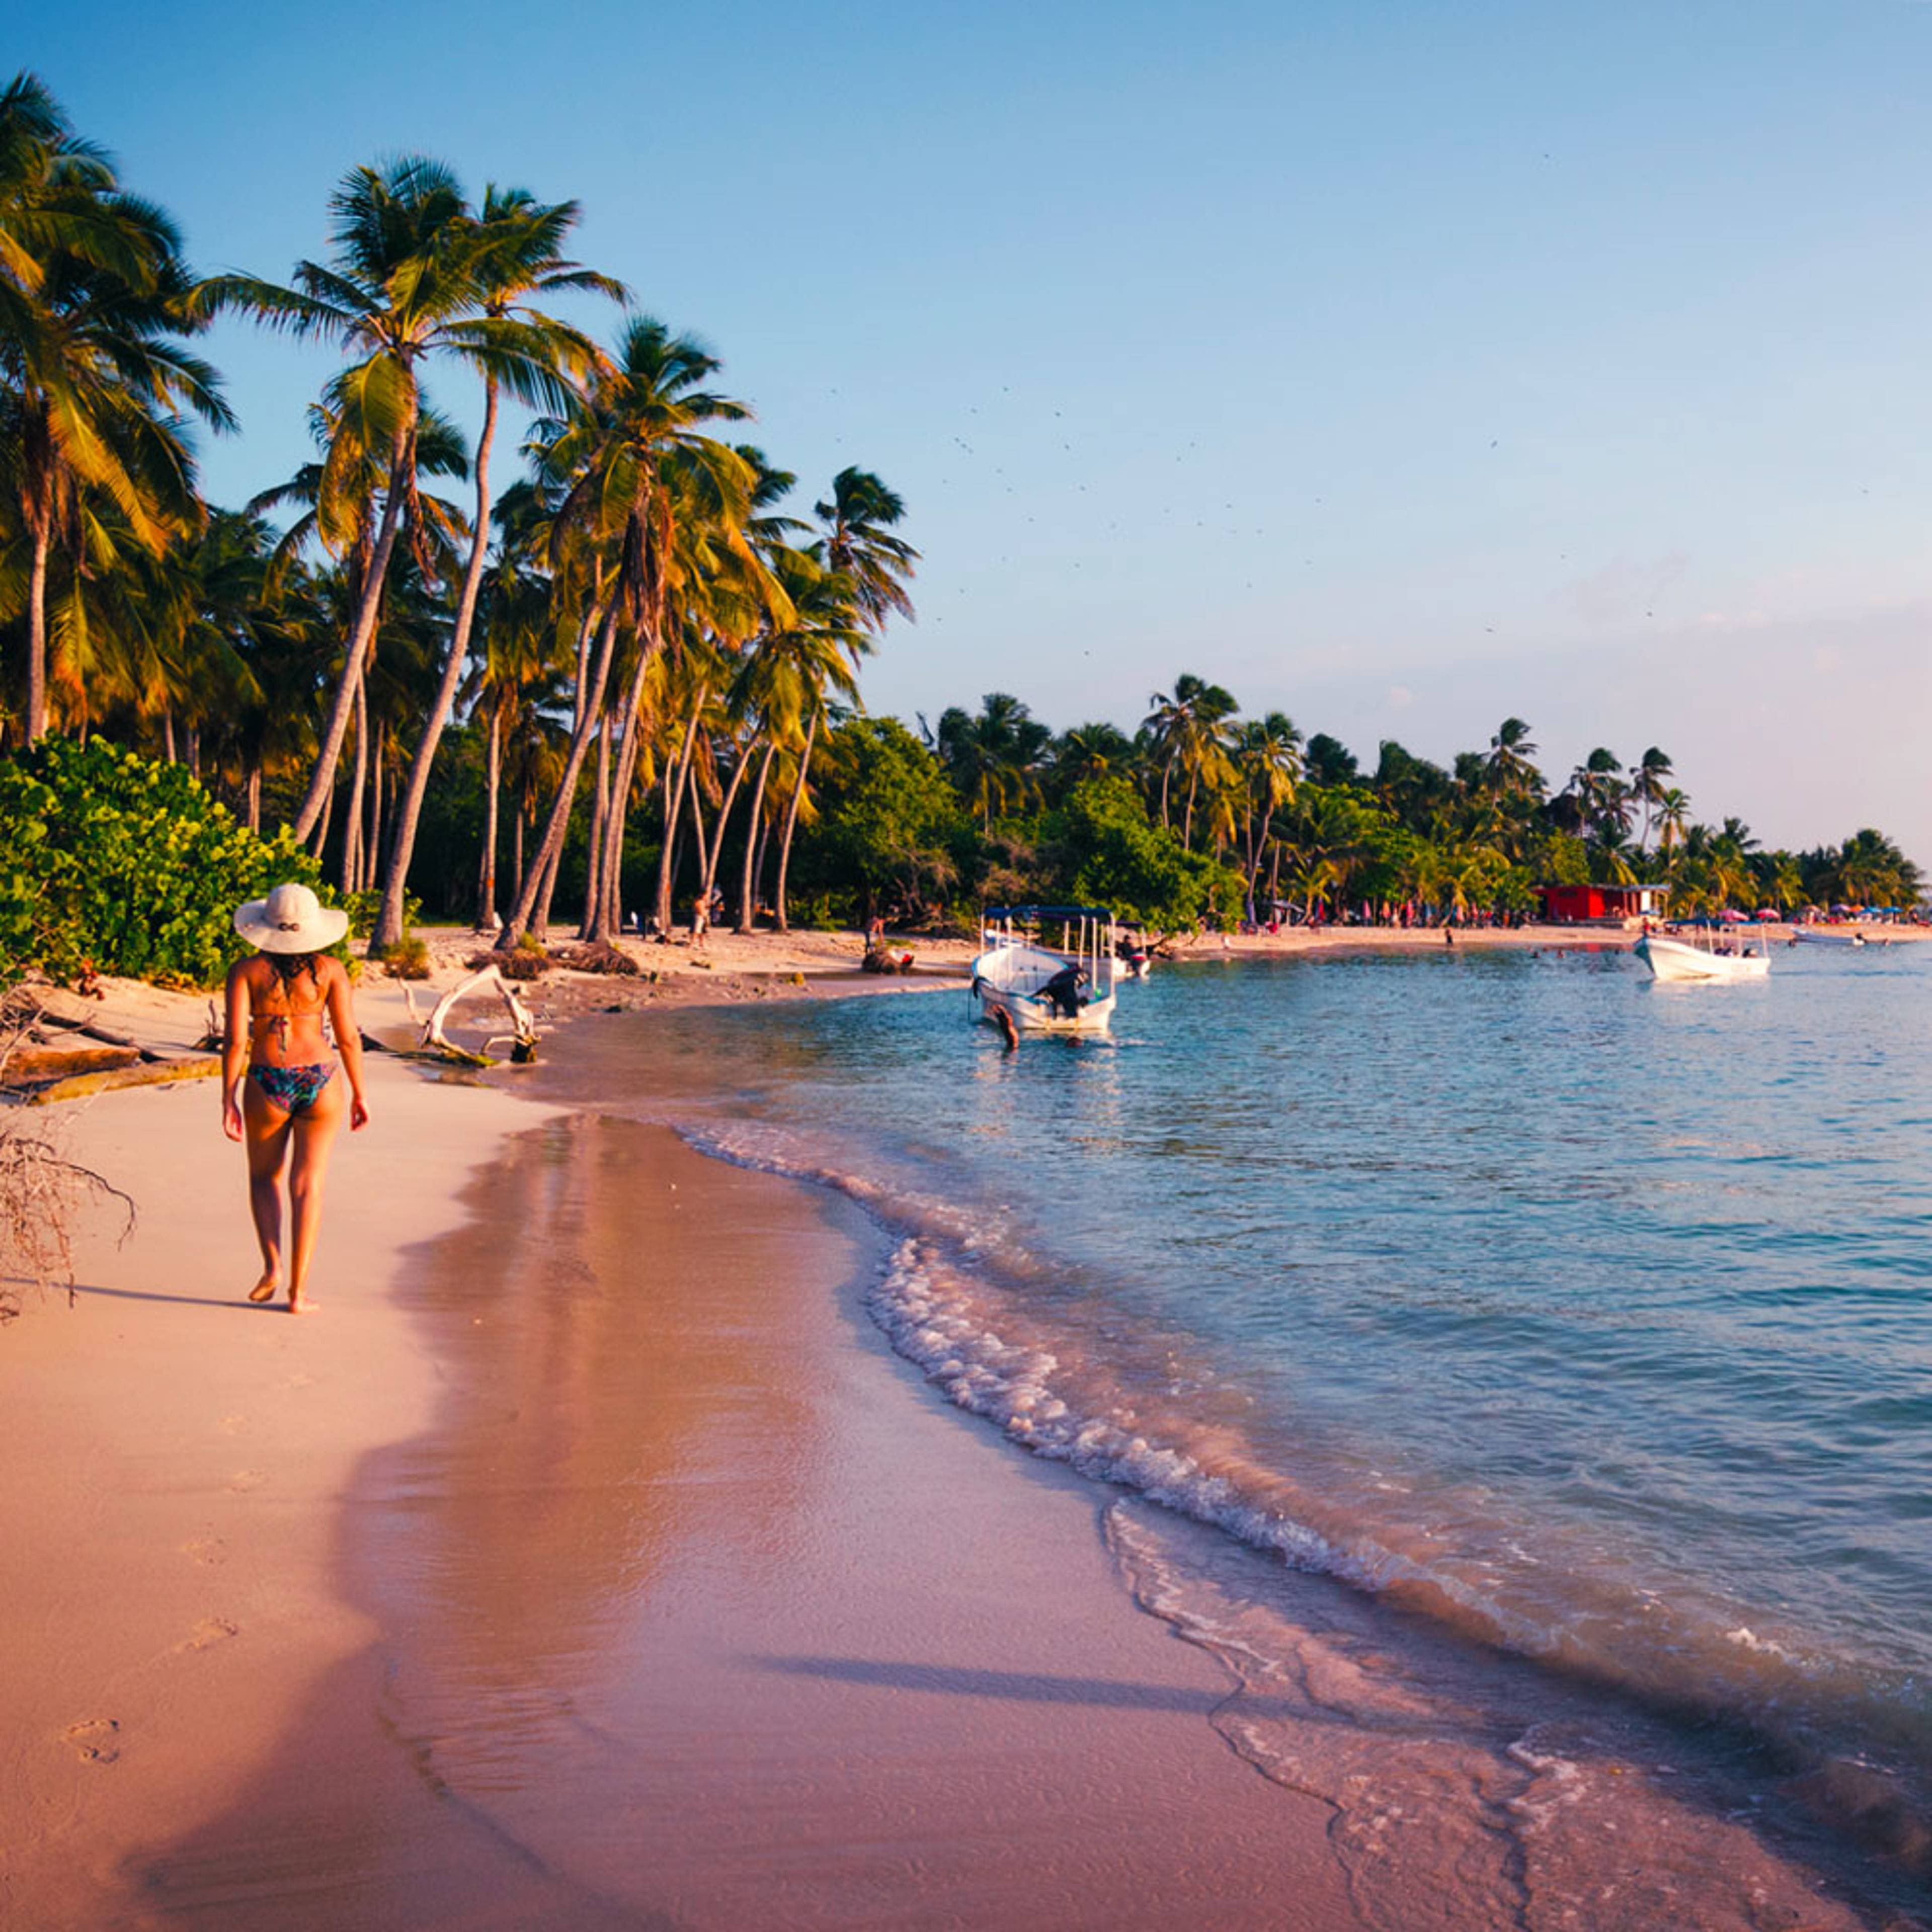 Design your perfect tour of Venezuela's beaches with a local expert